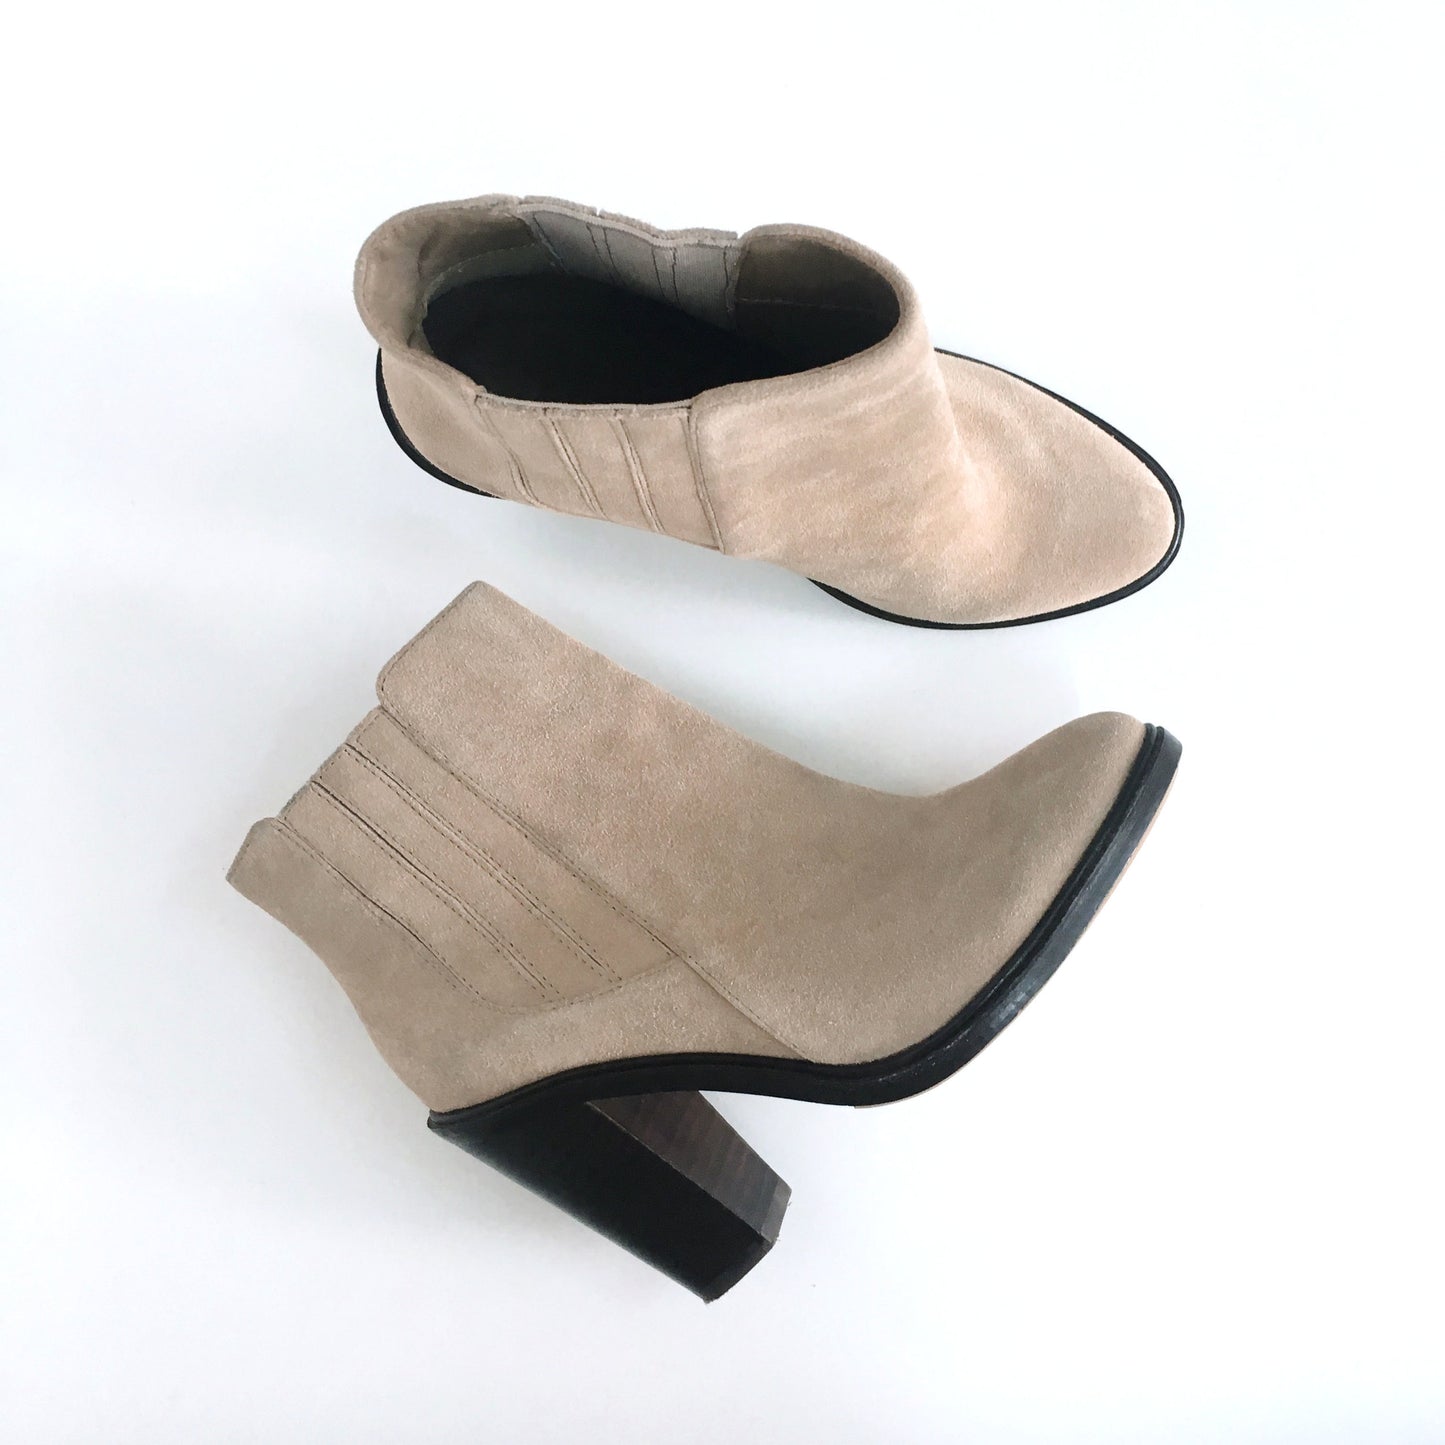 Joie Cloee suede heeled Boot - size 37